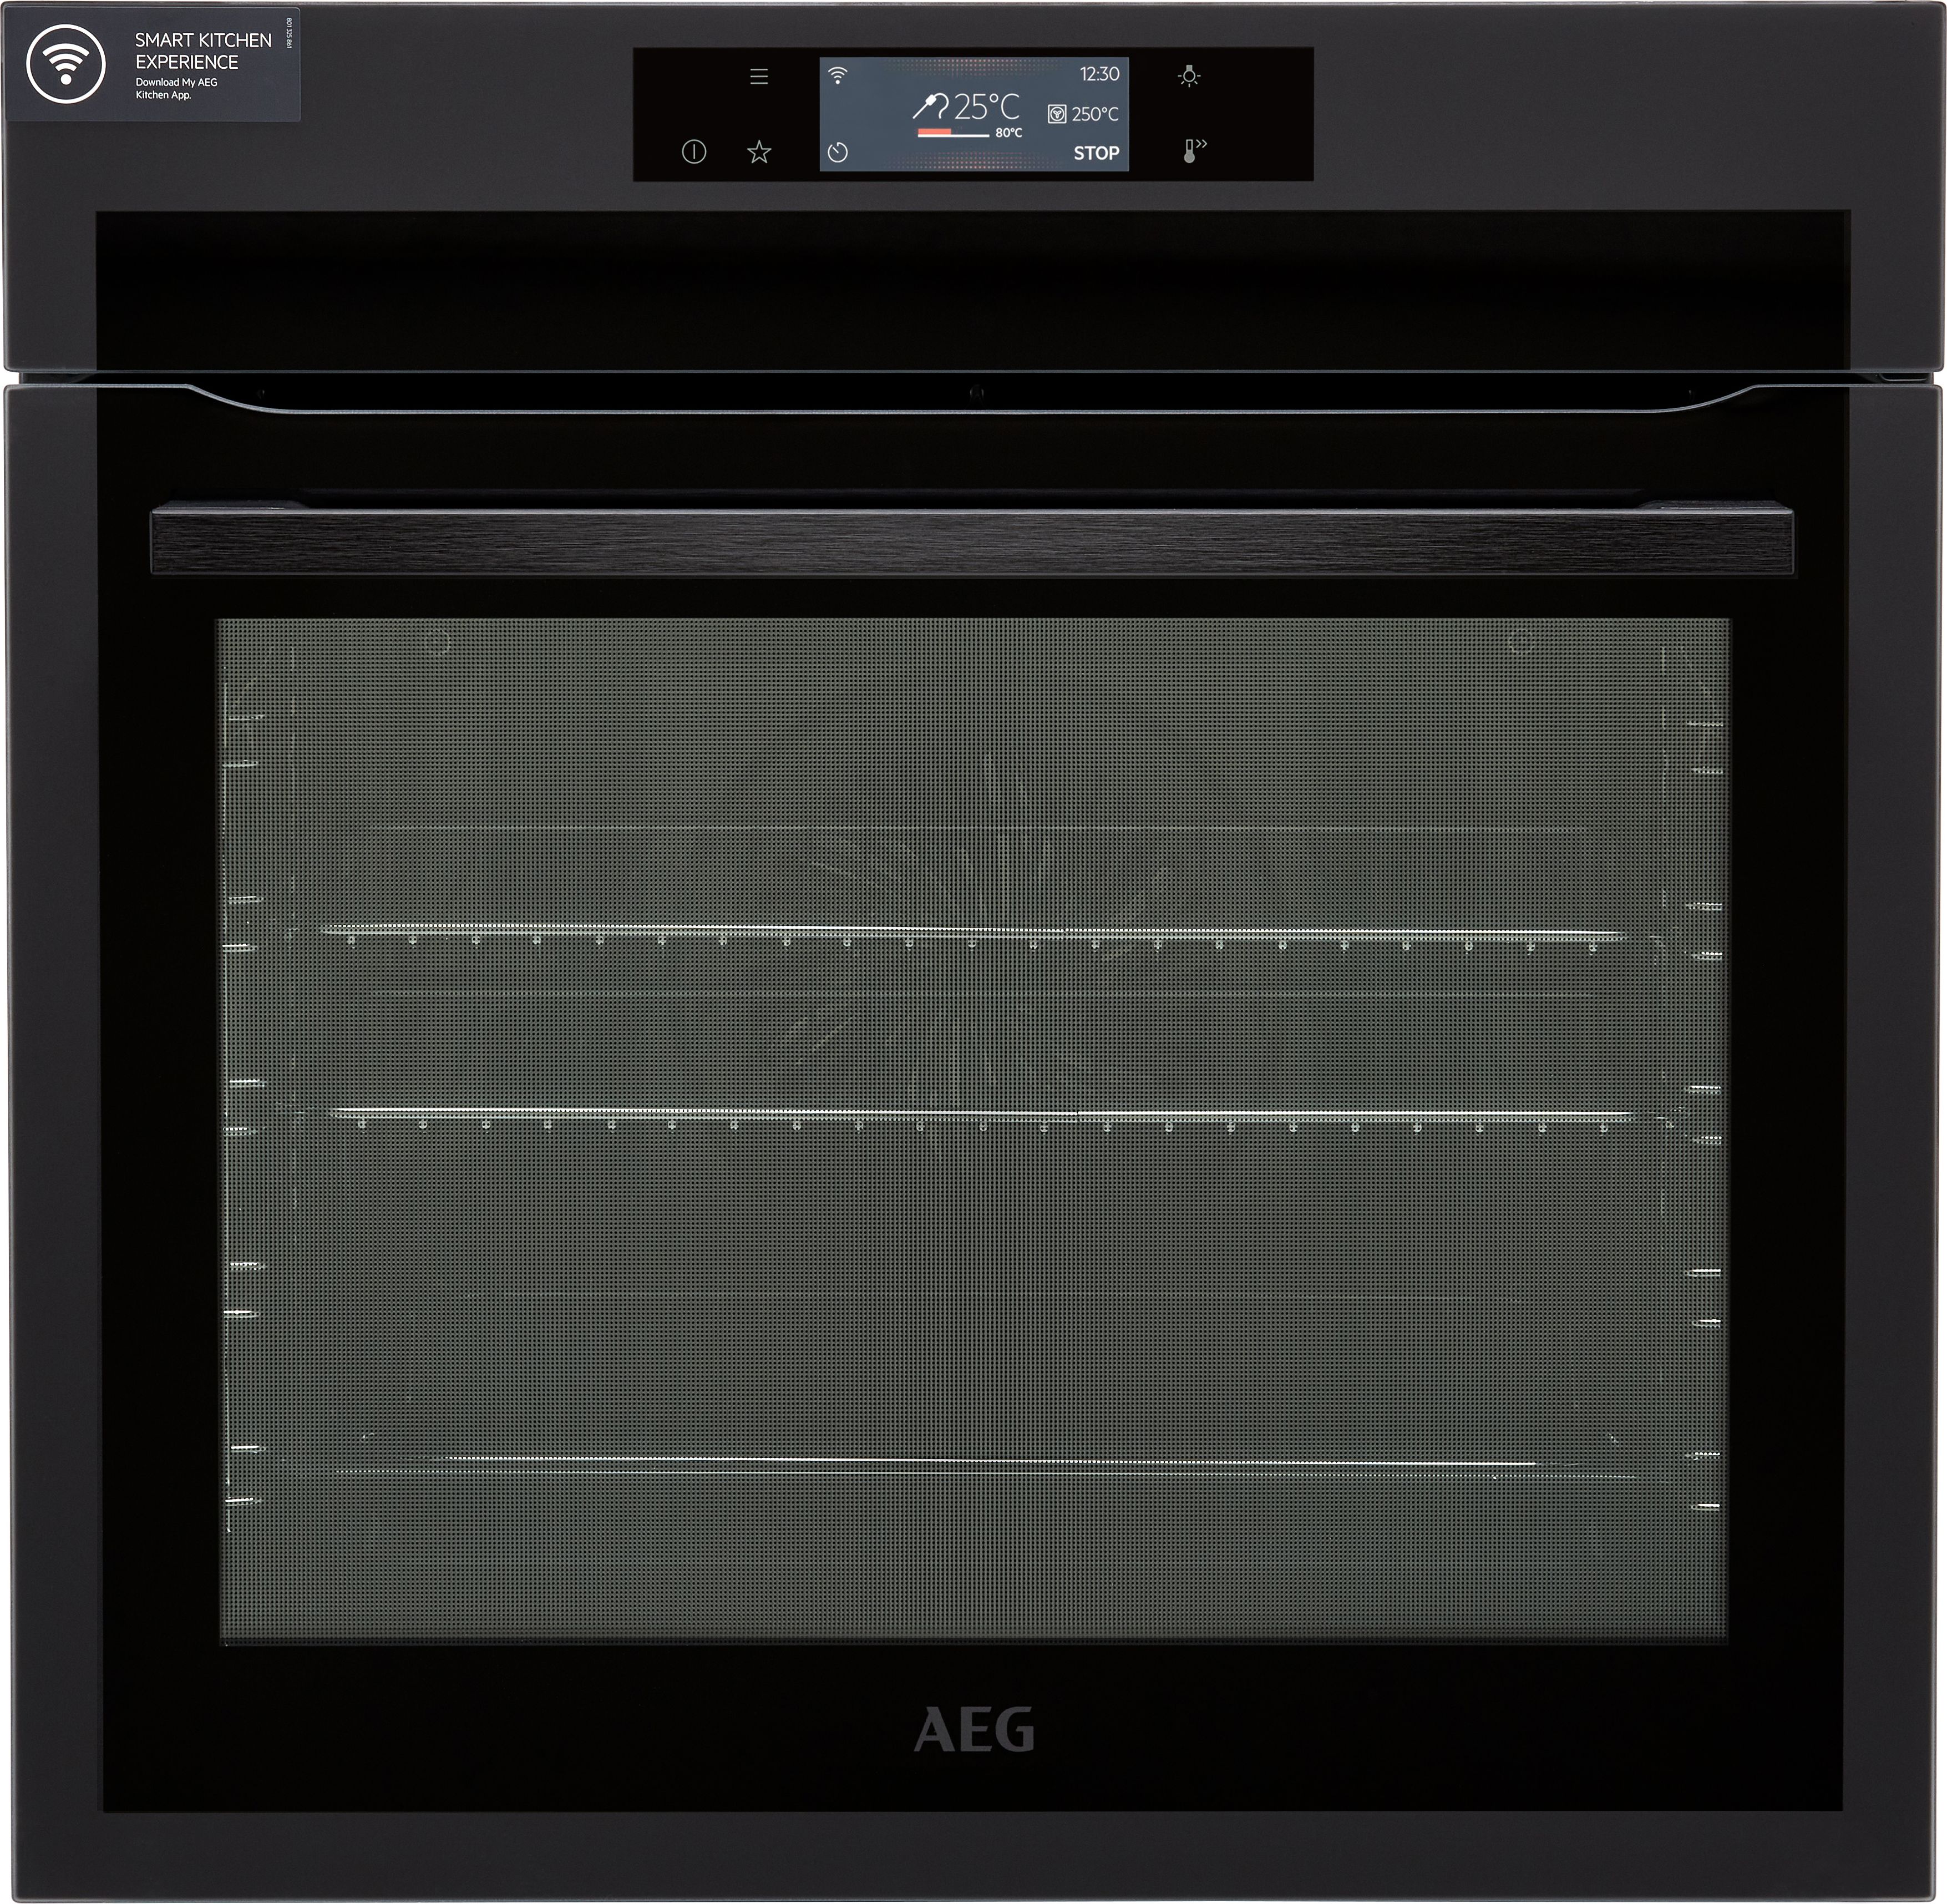 AEG AssistedCooking BPE748380T Built In Electric Single Oven with Pyrolytic Cleaning - Matte Black - A++ Rated, Black